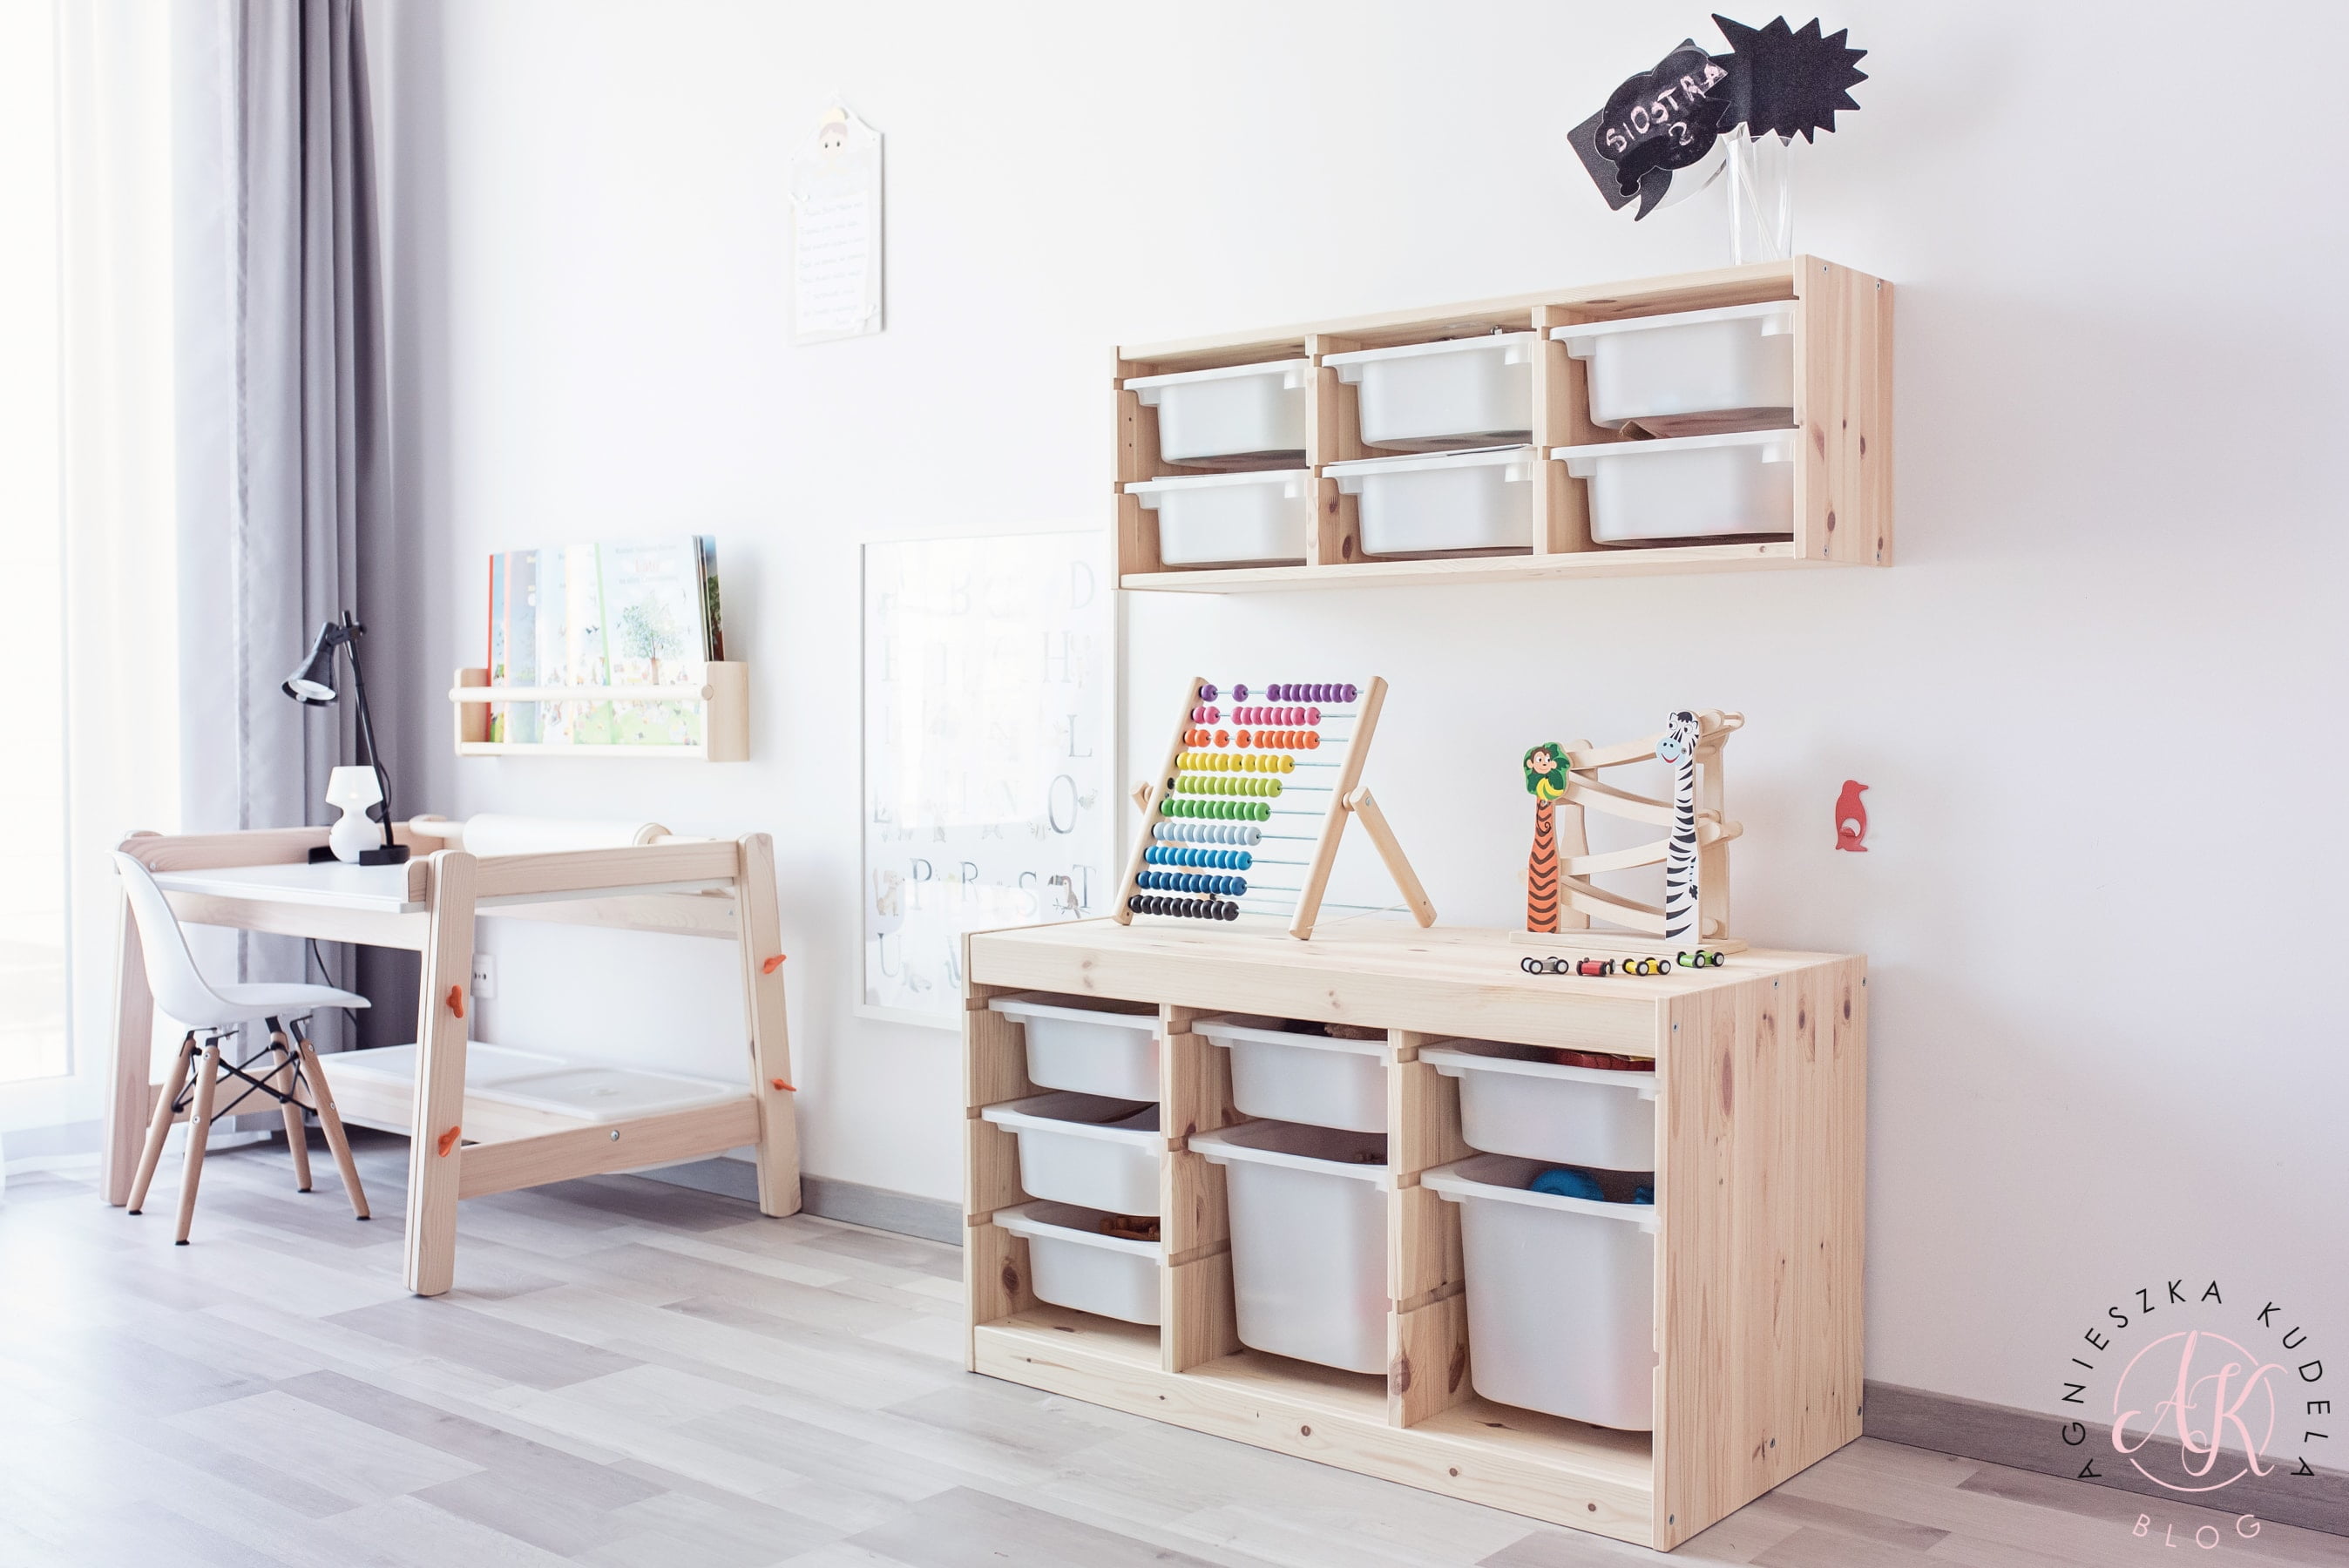 baby room furniture